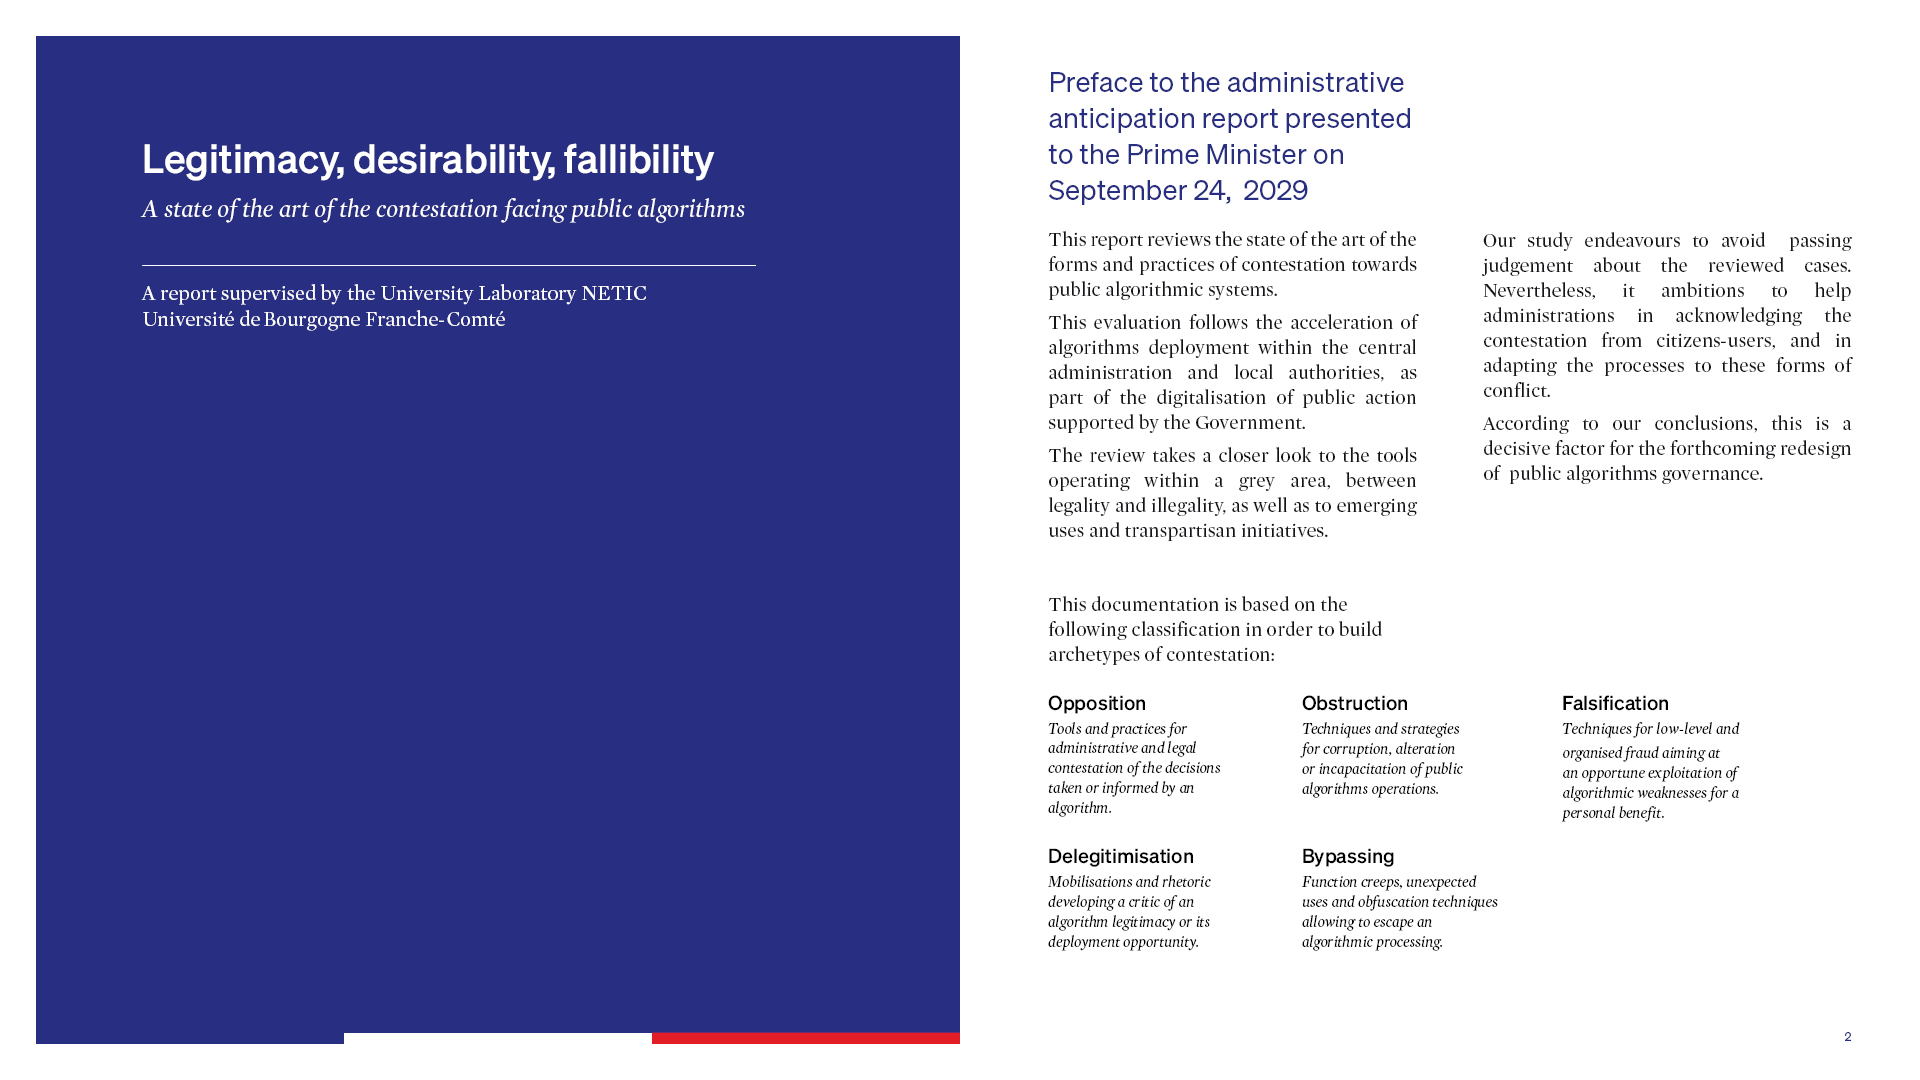 Preface to the administrative anticipation report presented to the Prime Minister on September 24, 2029